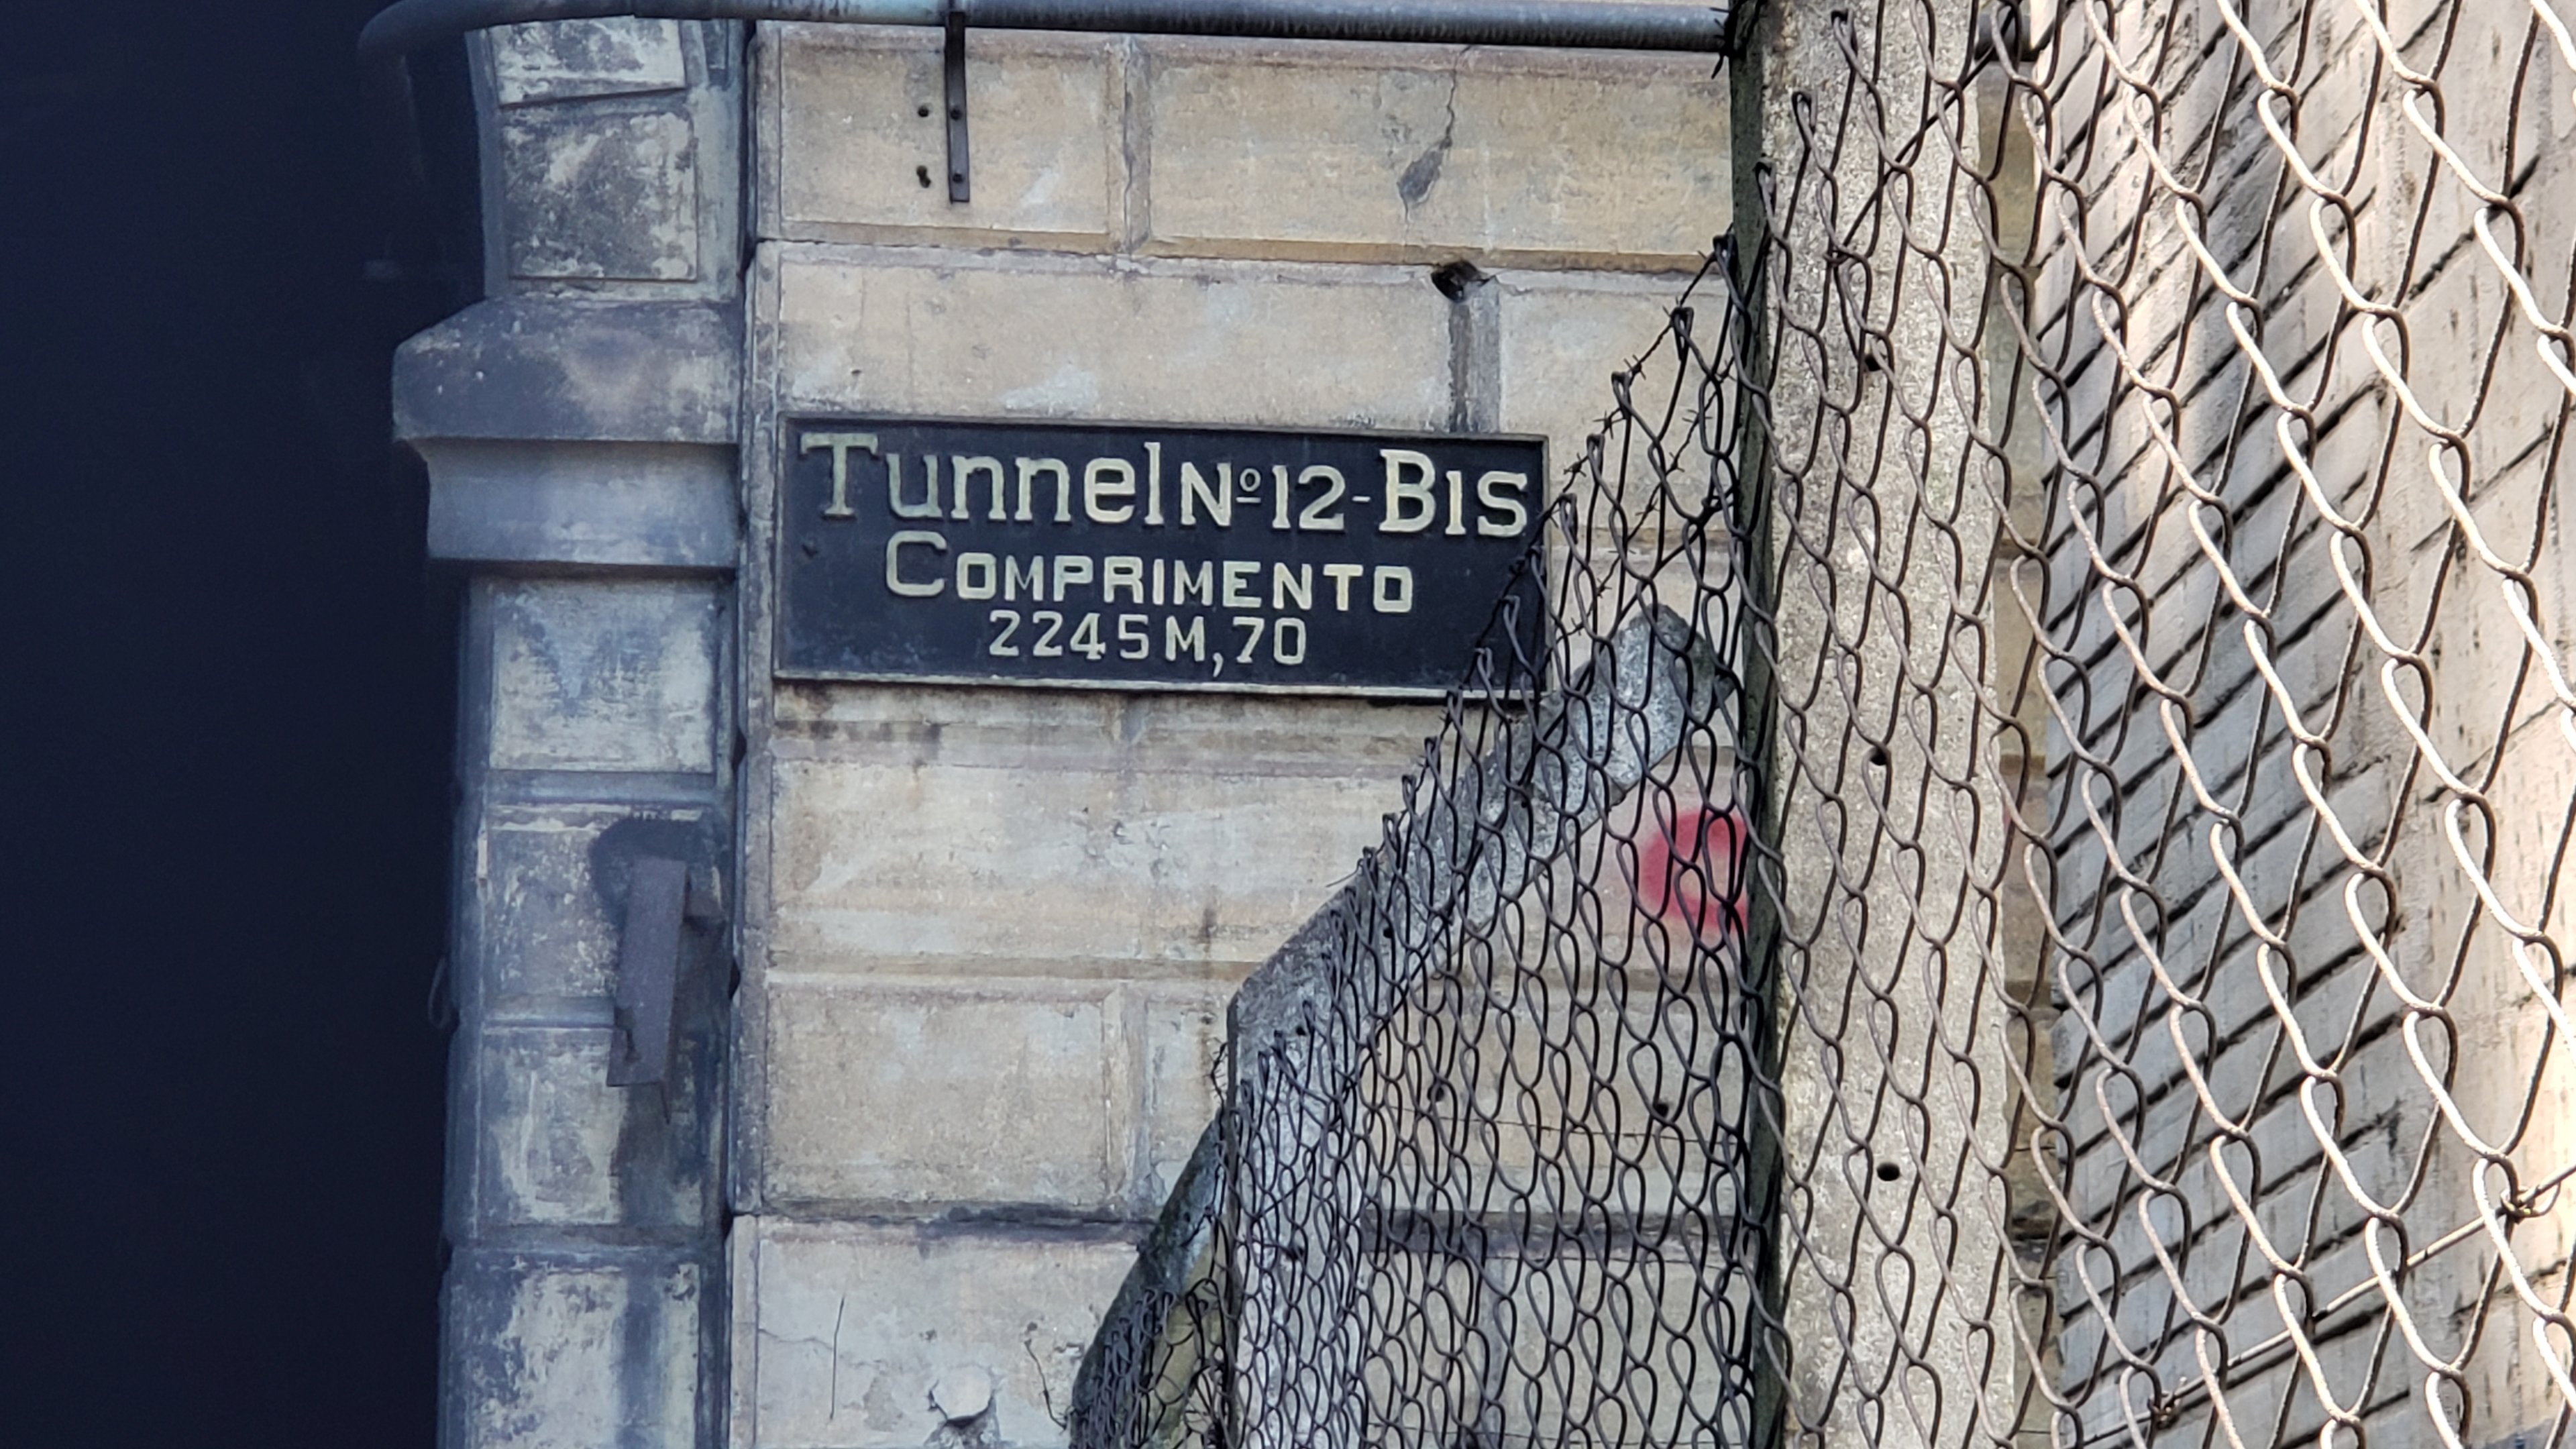 The plate of tunnel 12 Bis